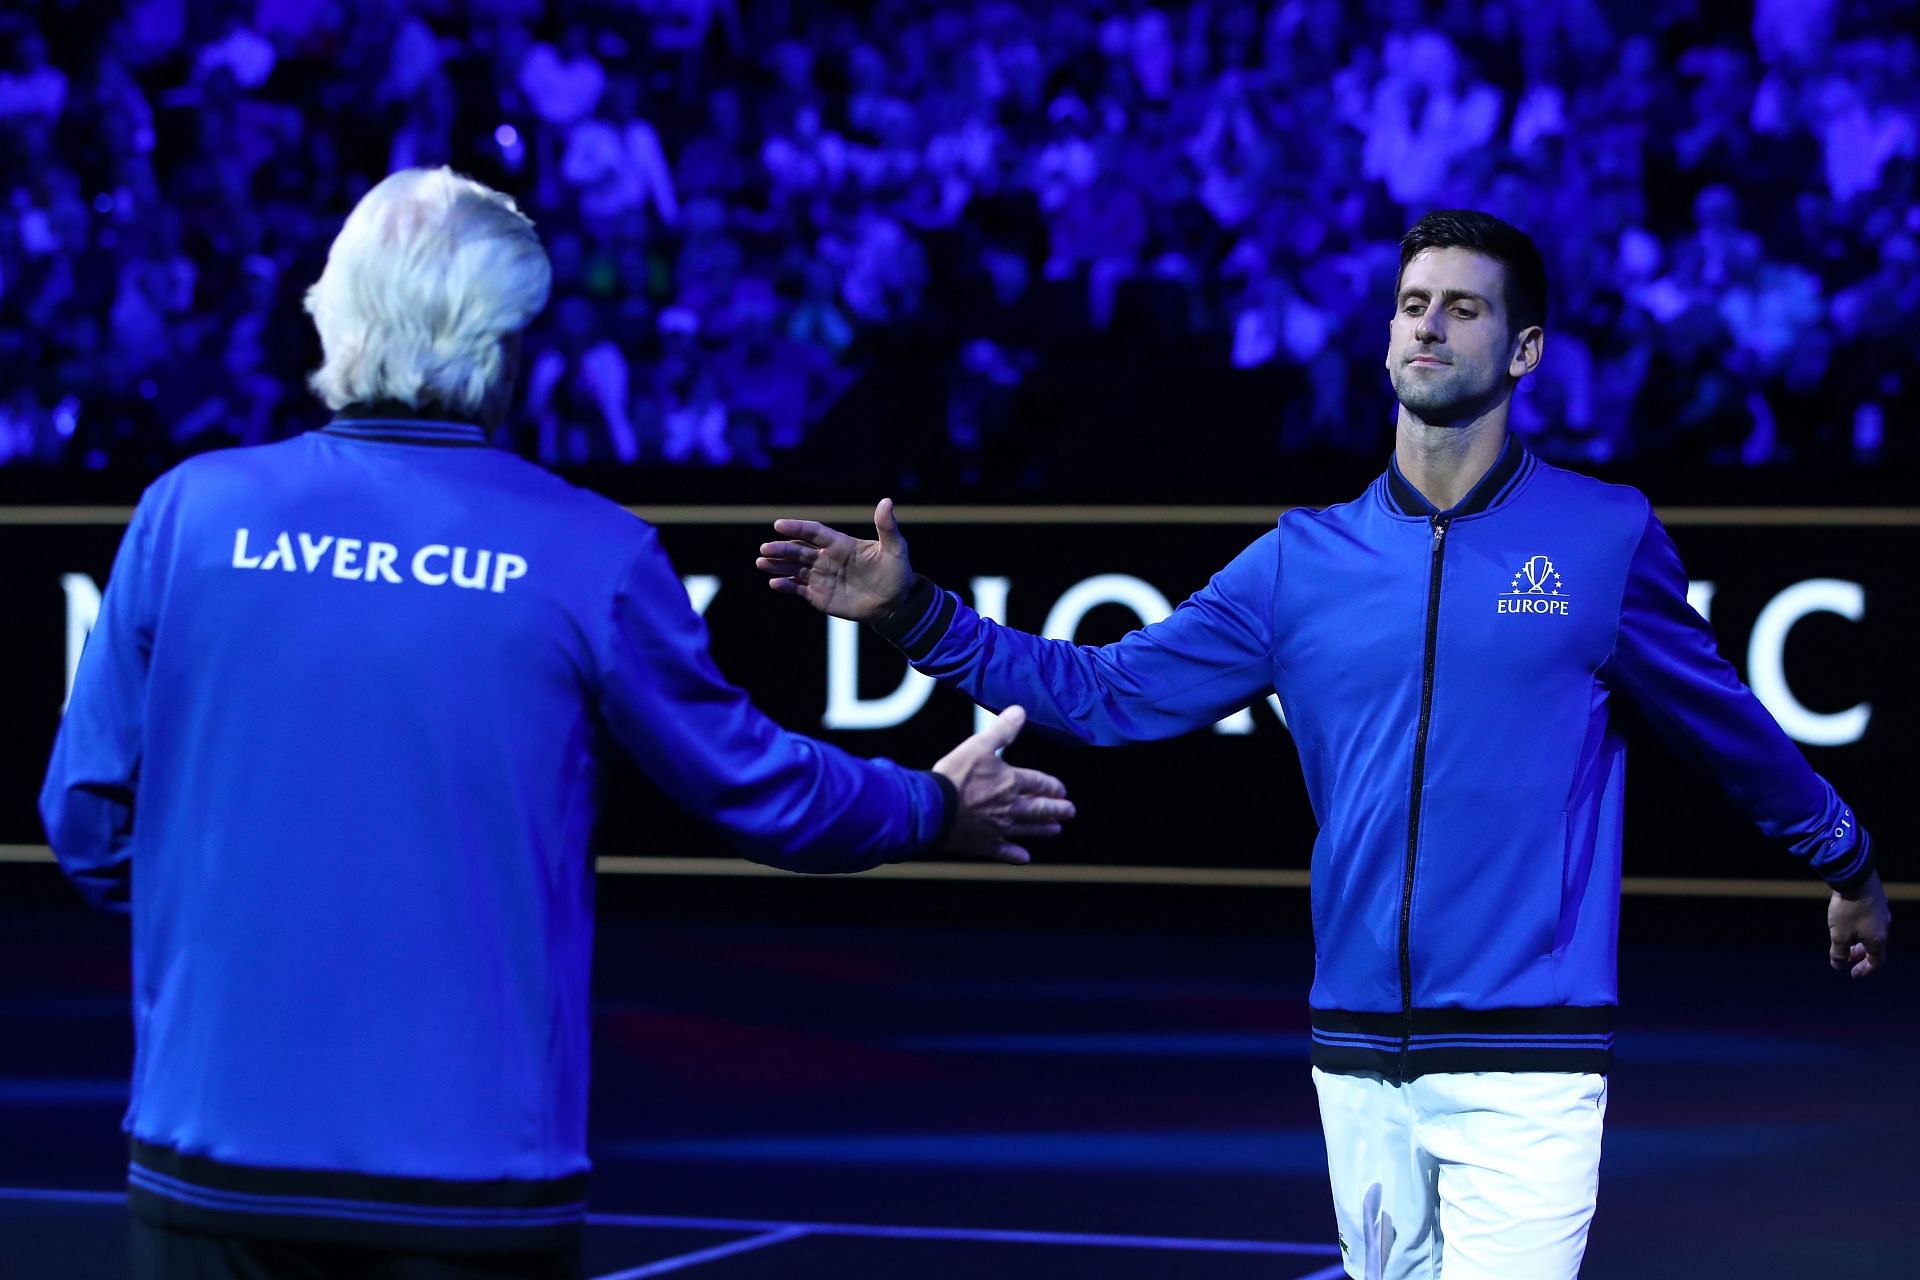 This will be Novak Djokovic&#039;s second appearance at the Laver Cup.